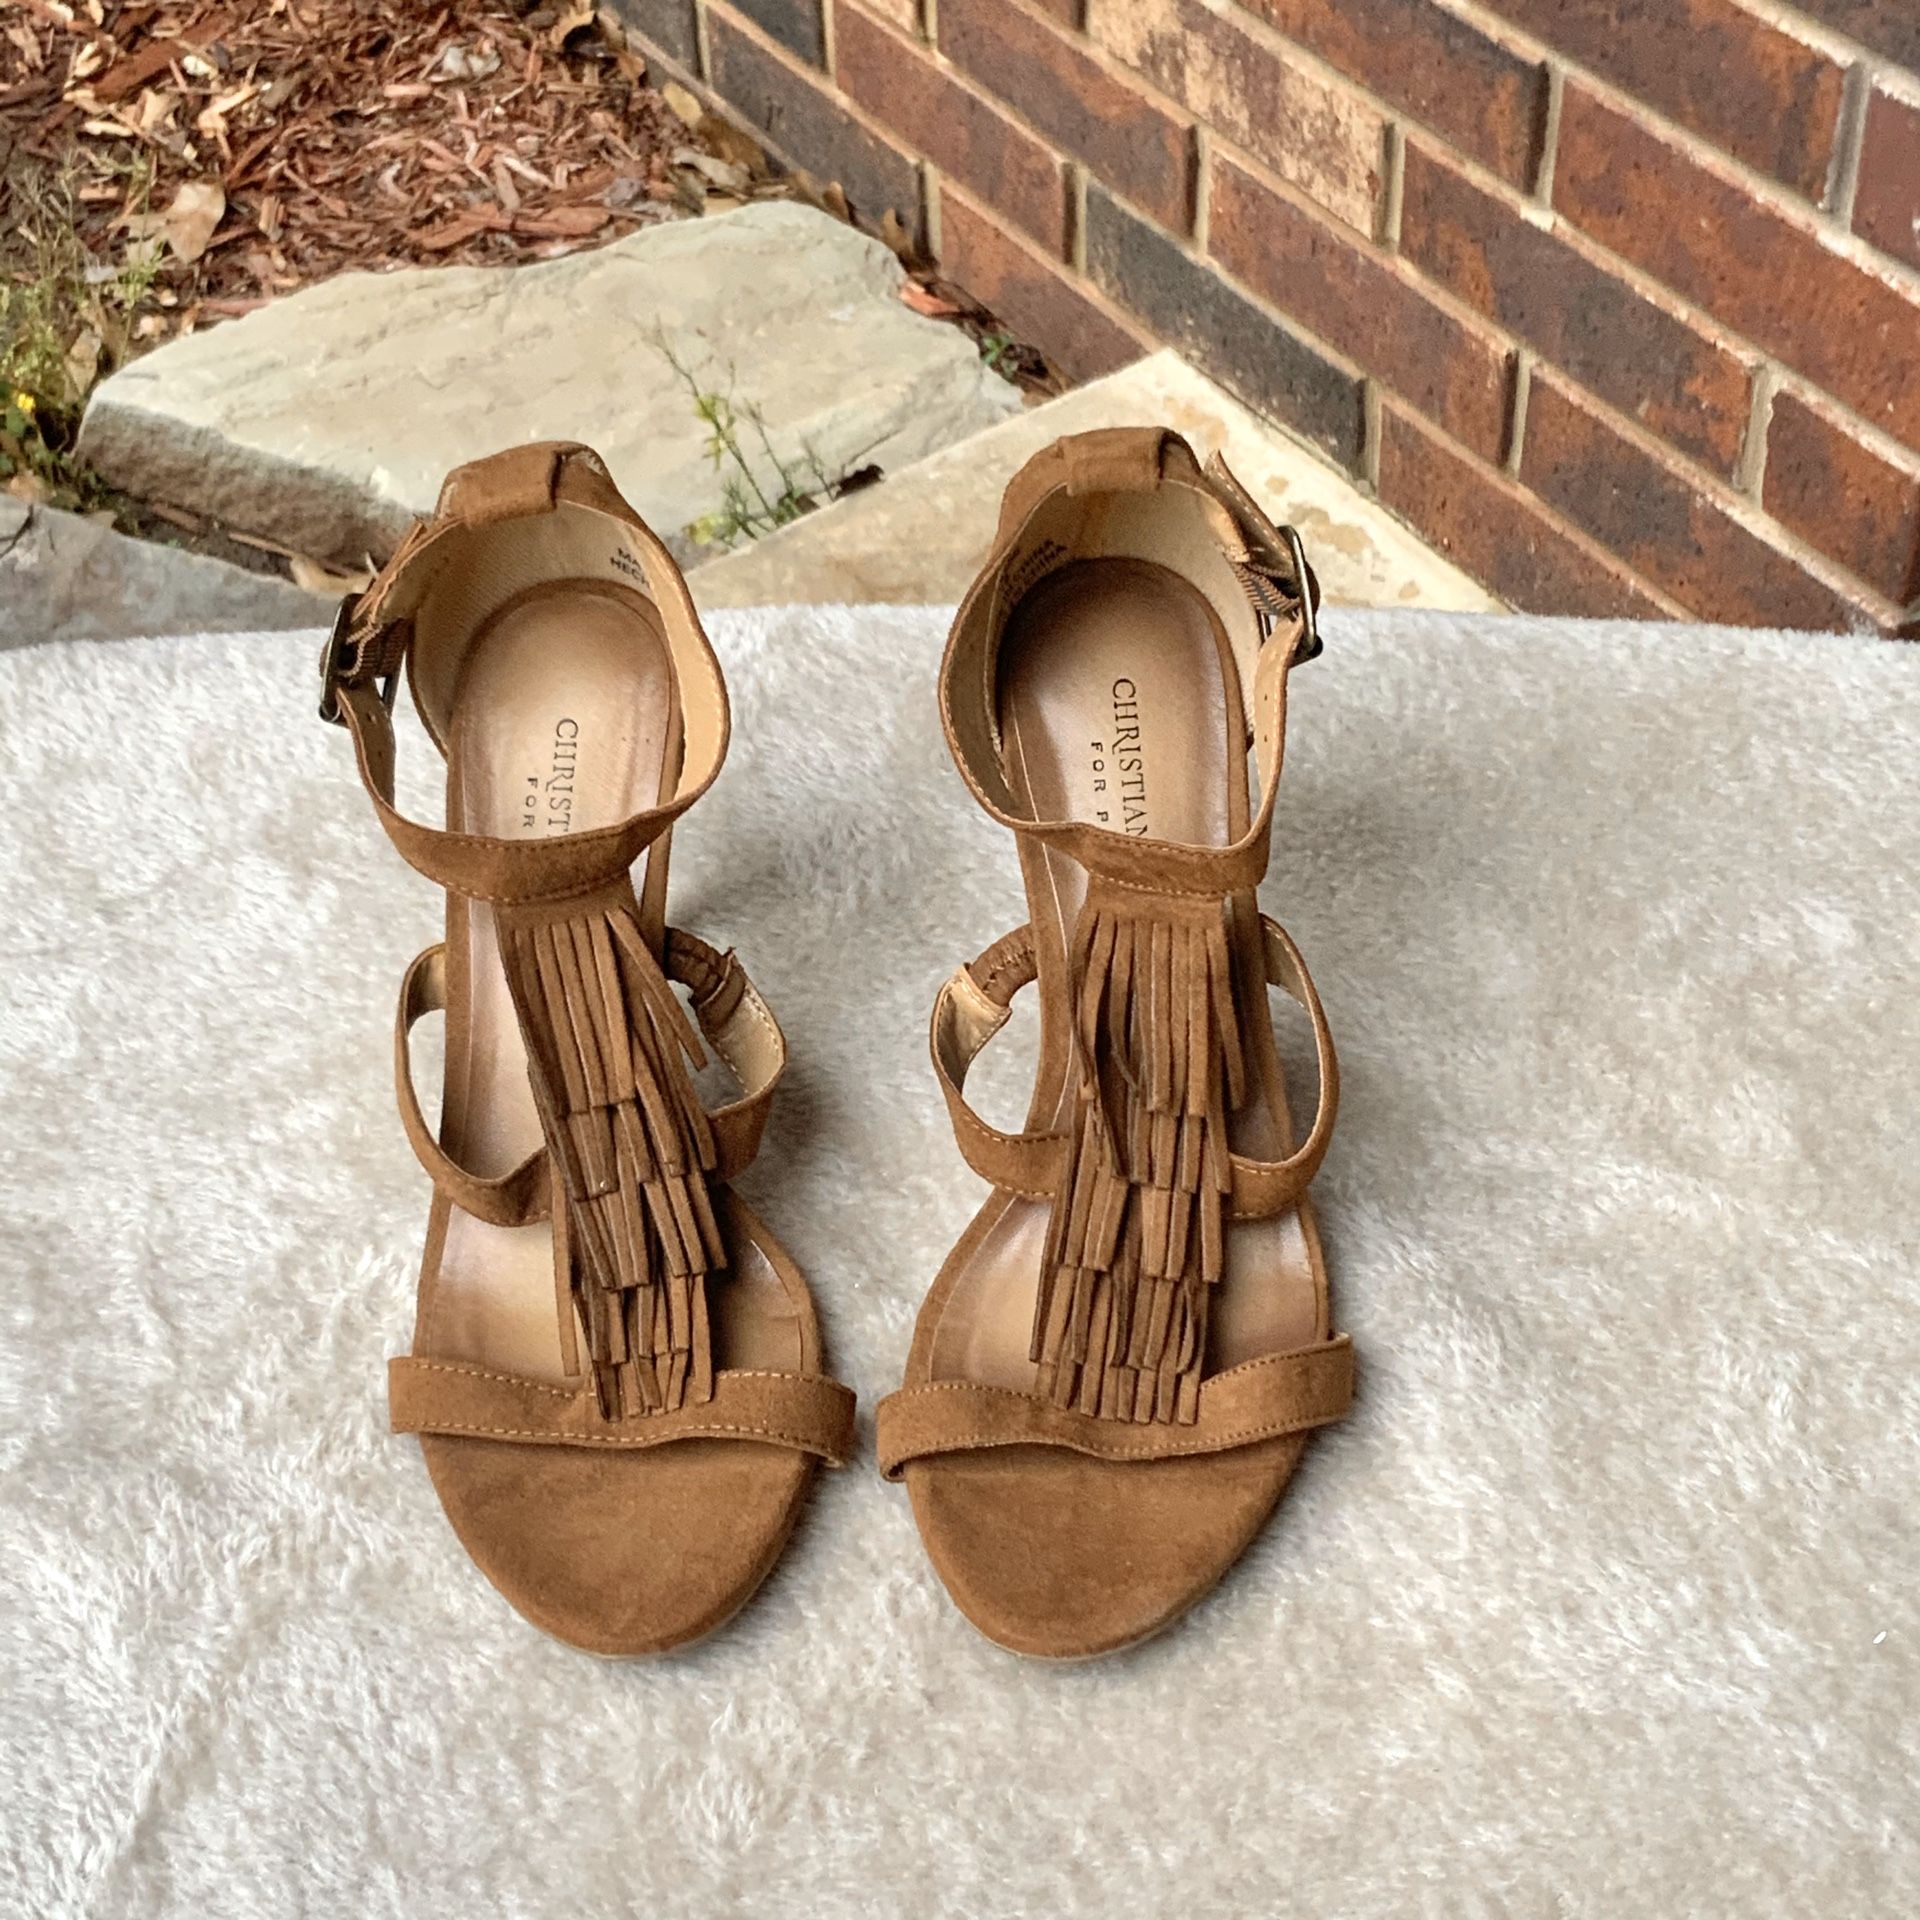 Christian Siriano for Payless Rust Ankle Strap Heels w Fringe Wm 6.5